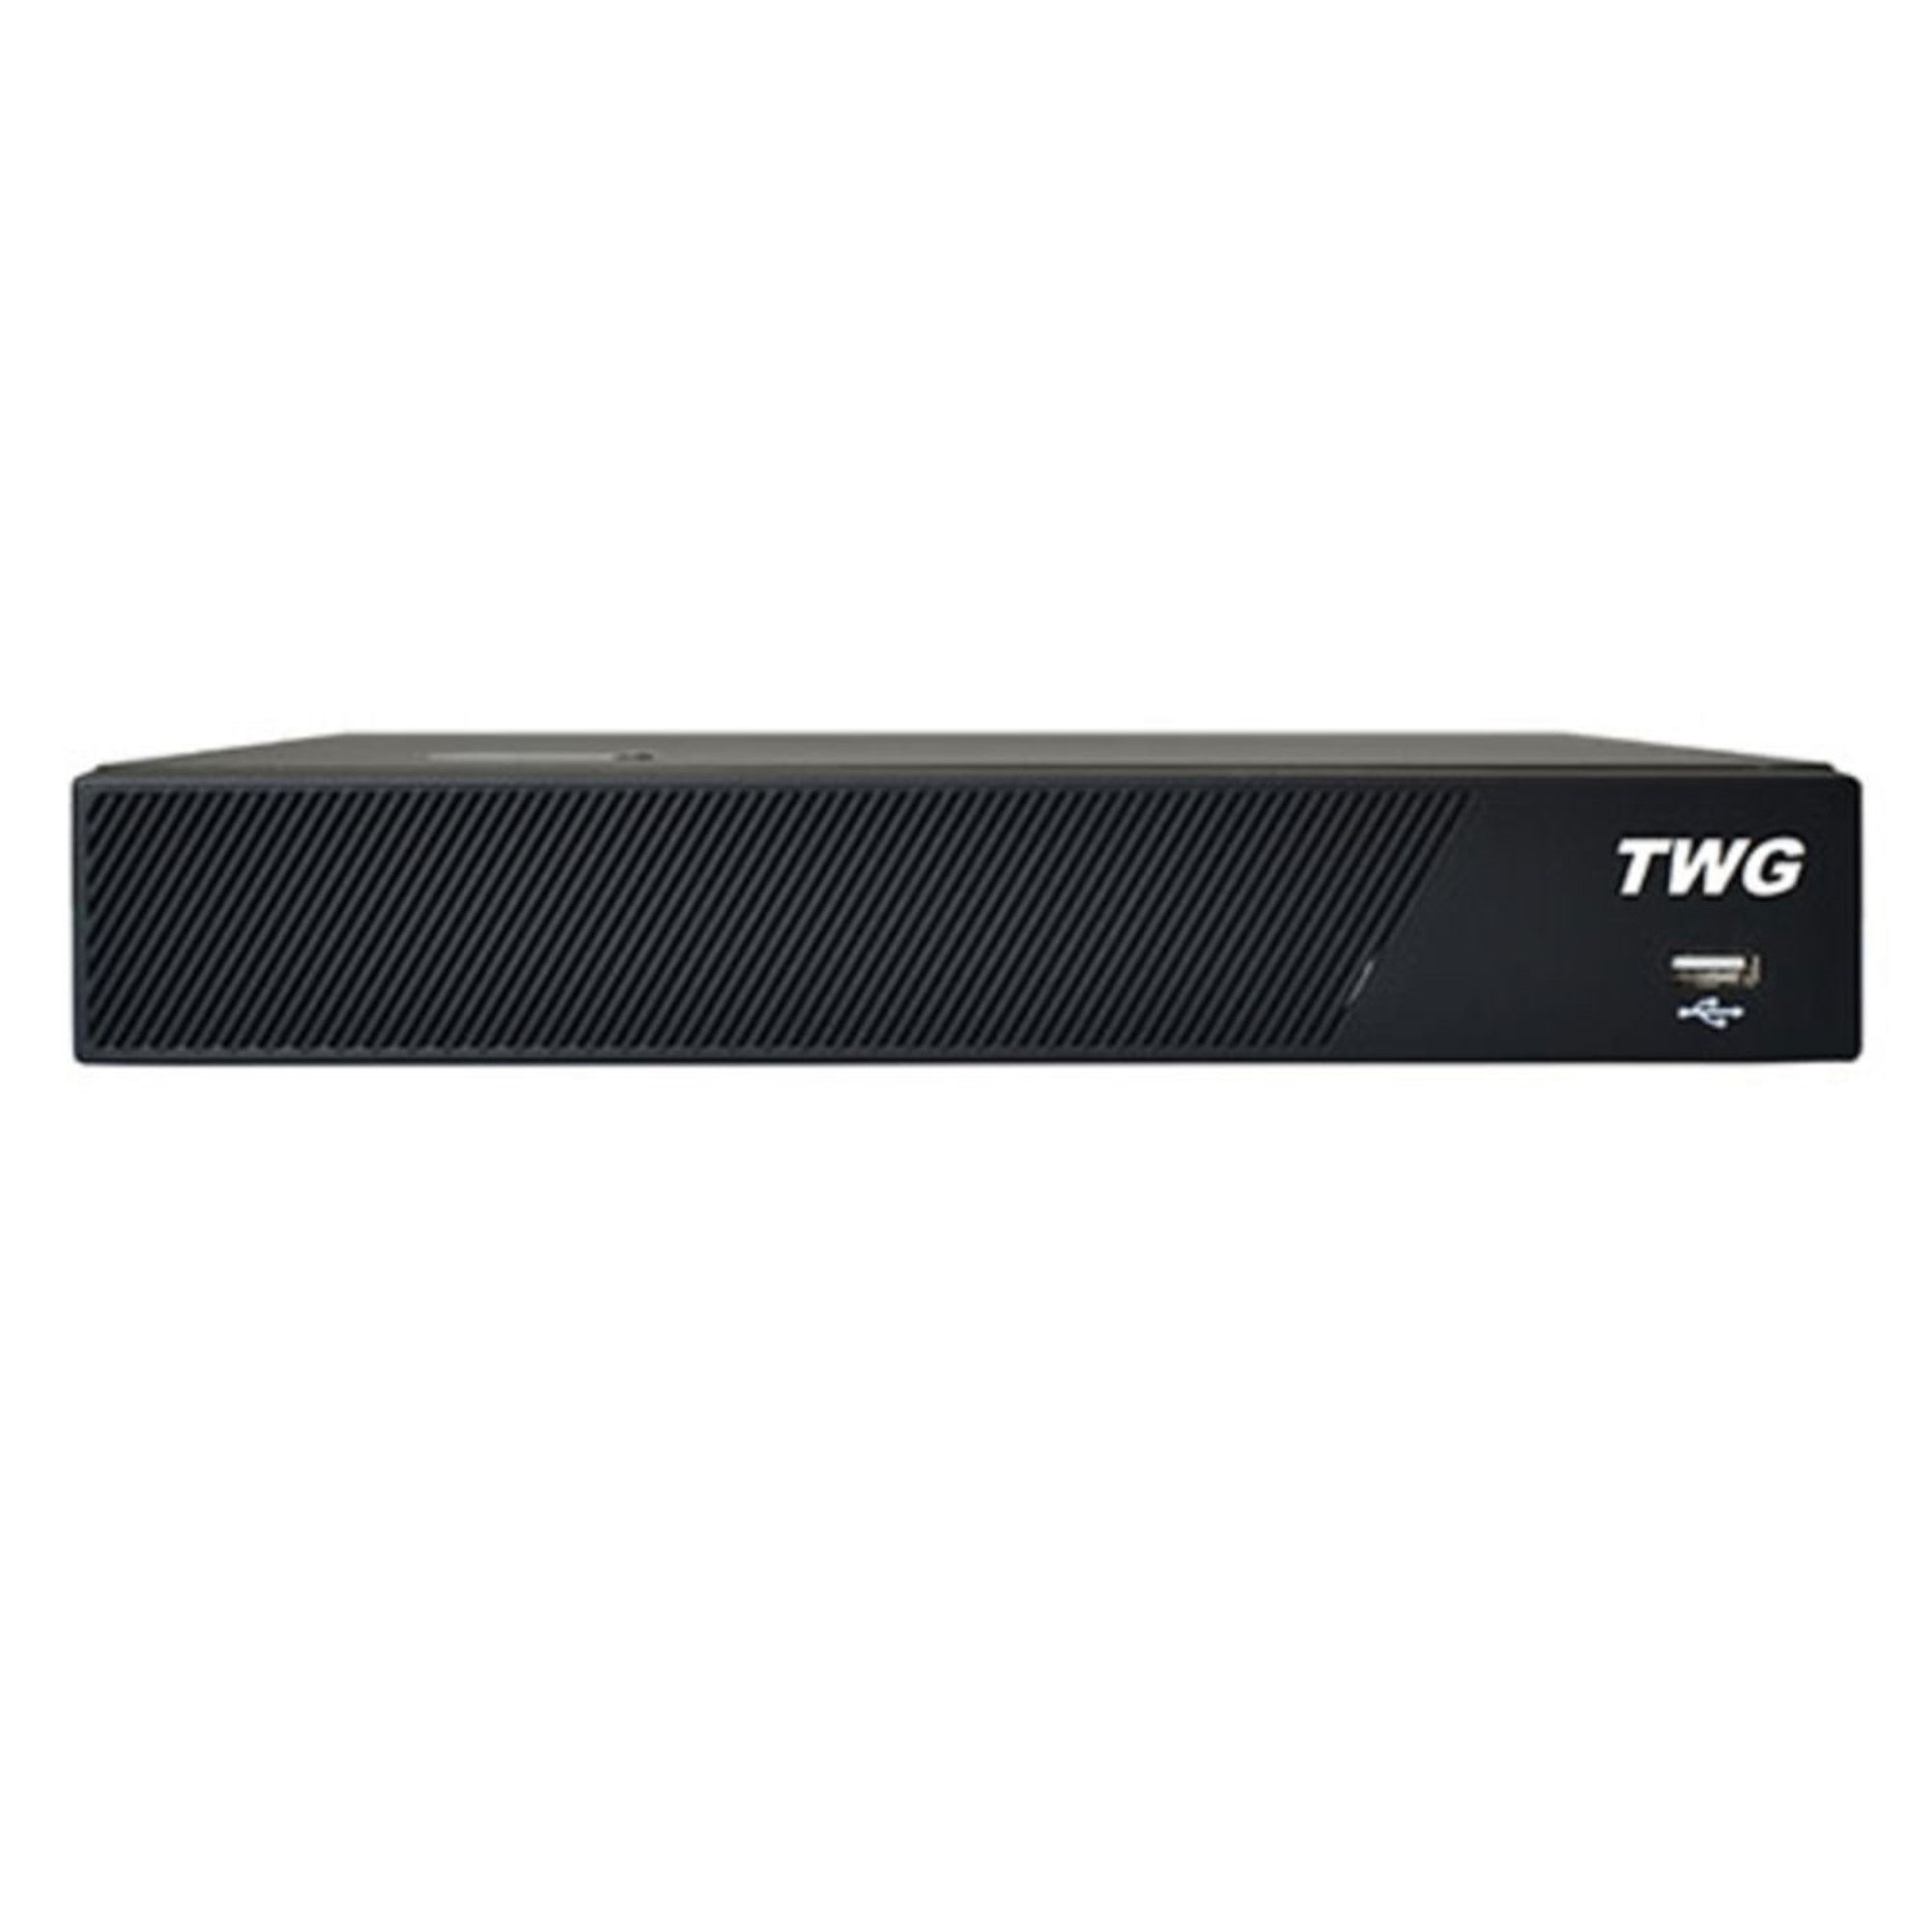 DVR Stand Alone 8 Canais TWG Full HD 5 em 1